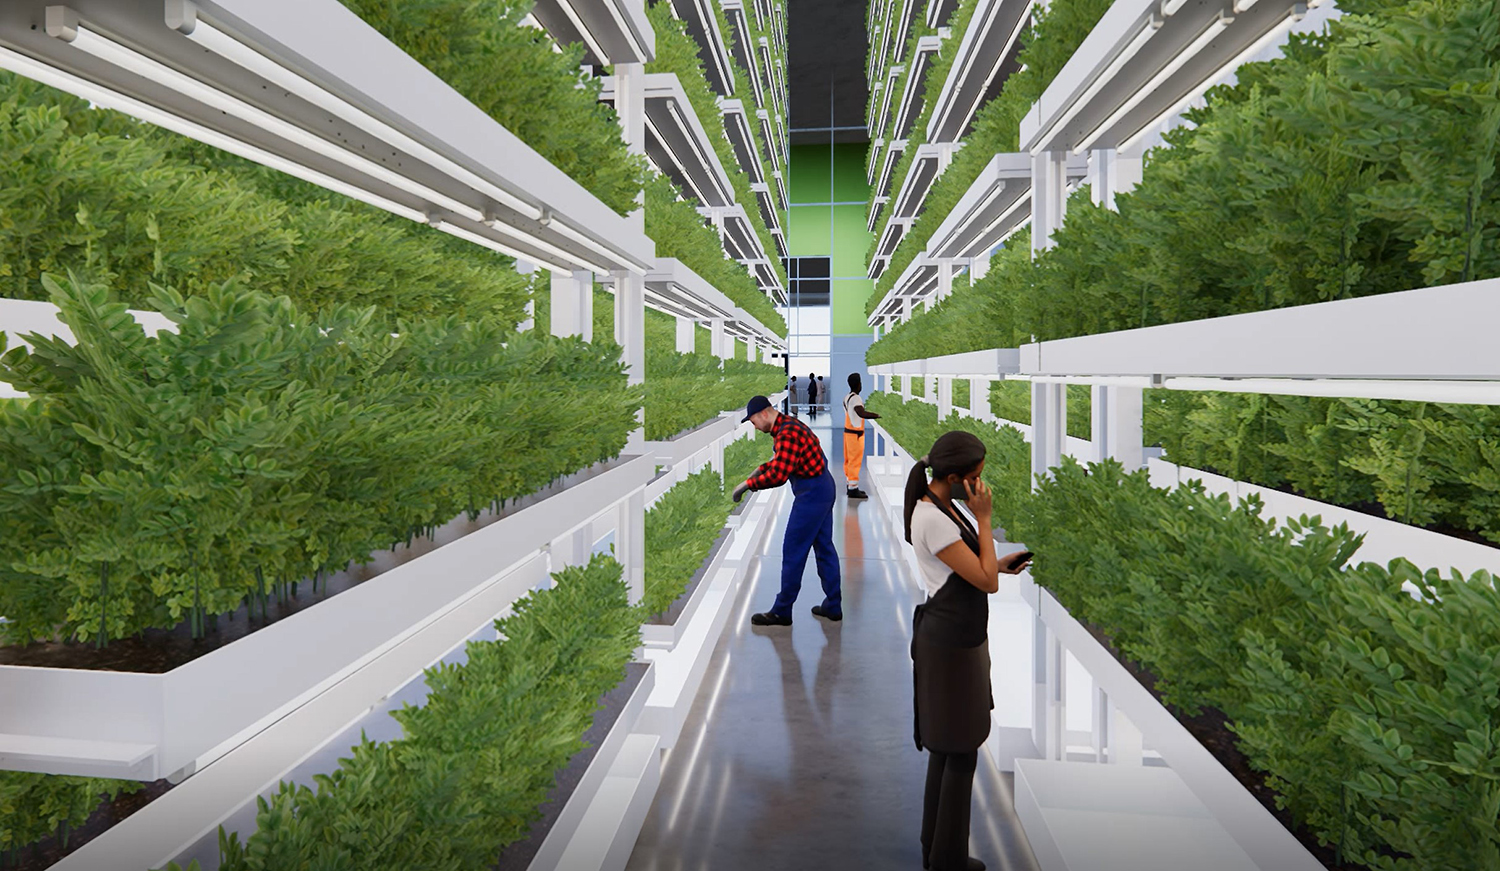 Vertical Farm at The Invert Chicago. Rendering by The Invert Chicago